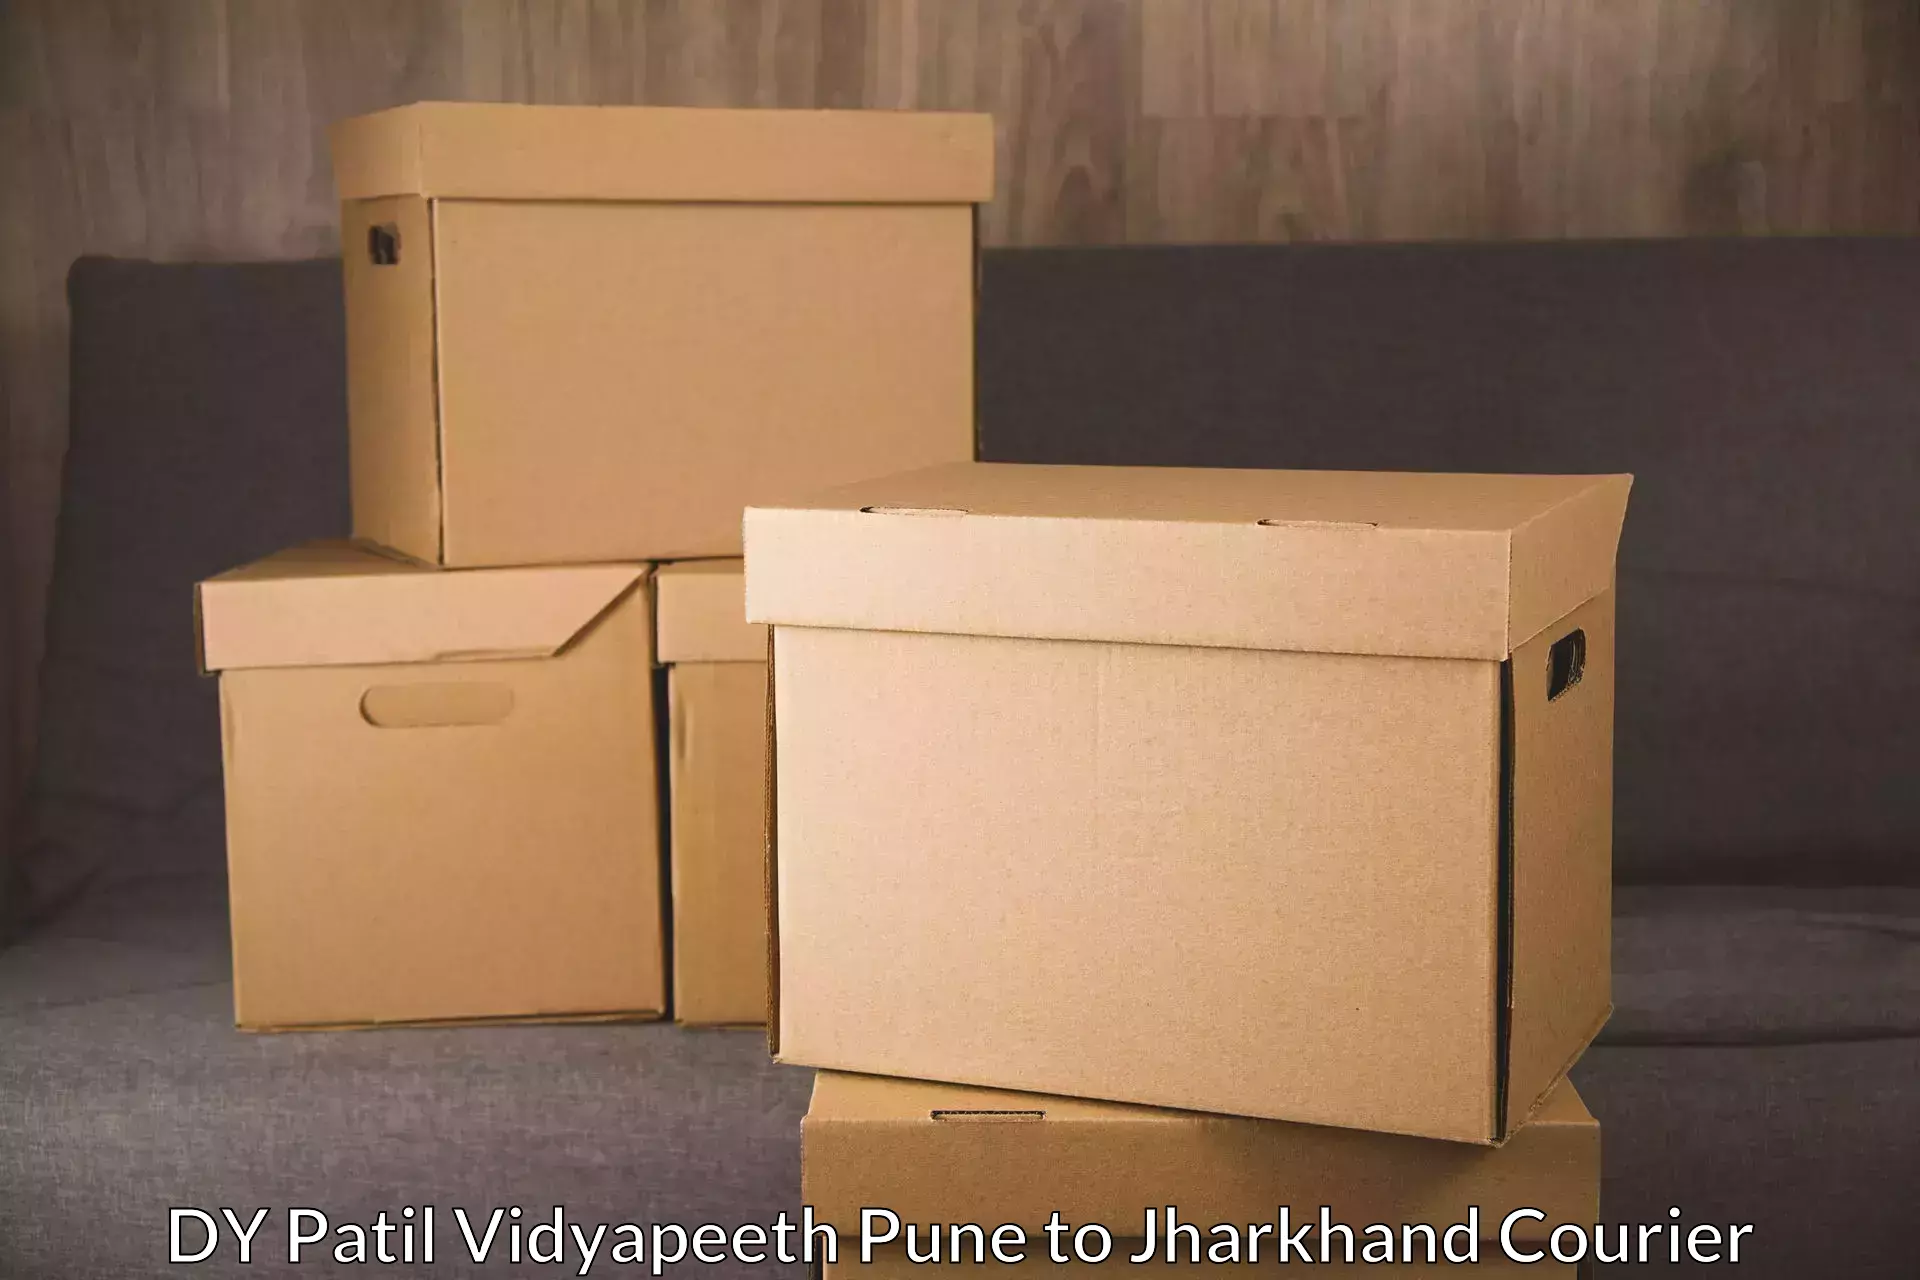 24-hour courier services DY Patil Vidyapeeth Pune to Lohardaga